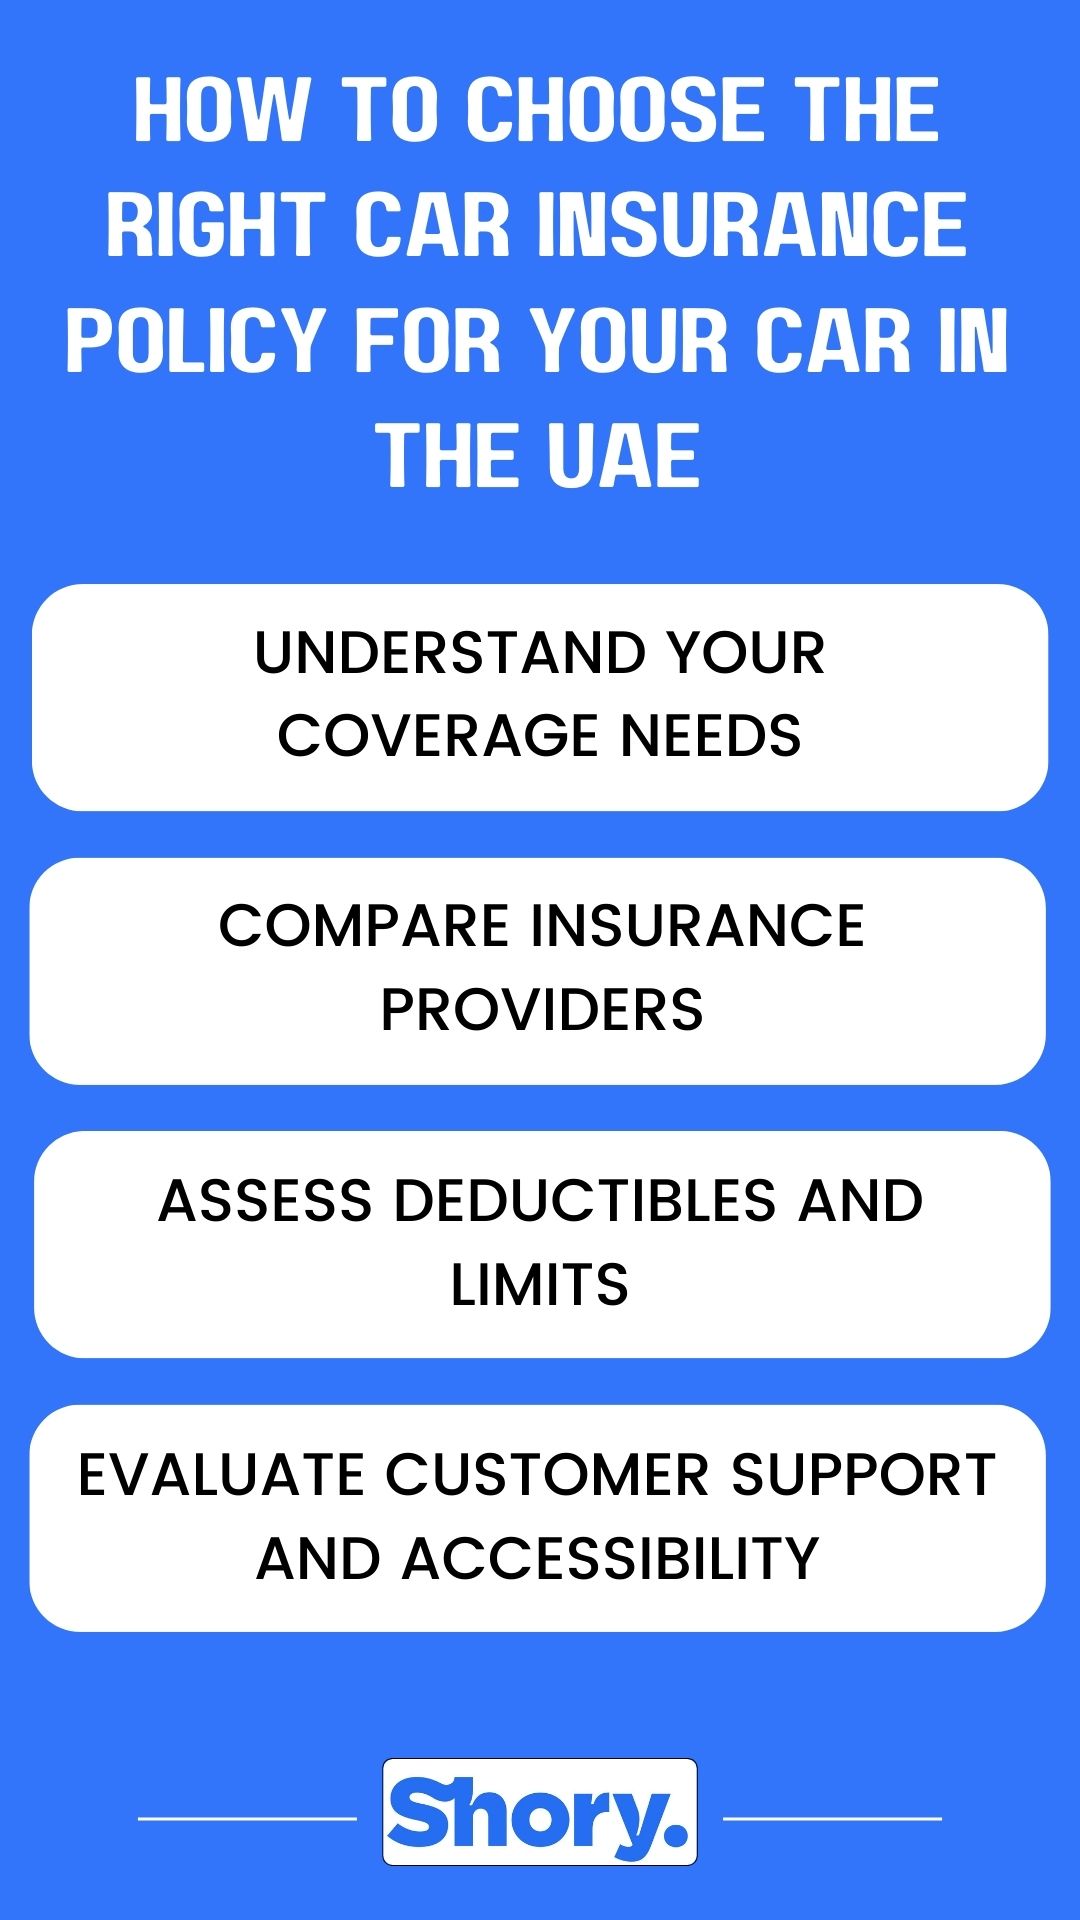 How to Choose the Right Car Insurance Policy for Your Car in the UAE